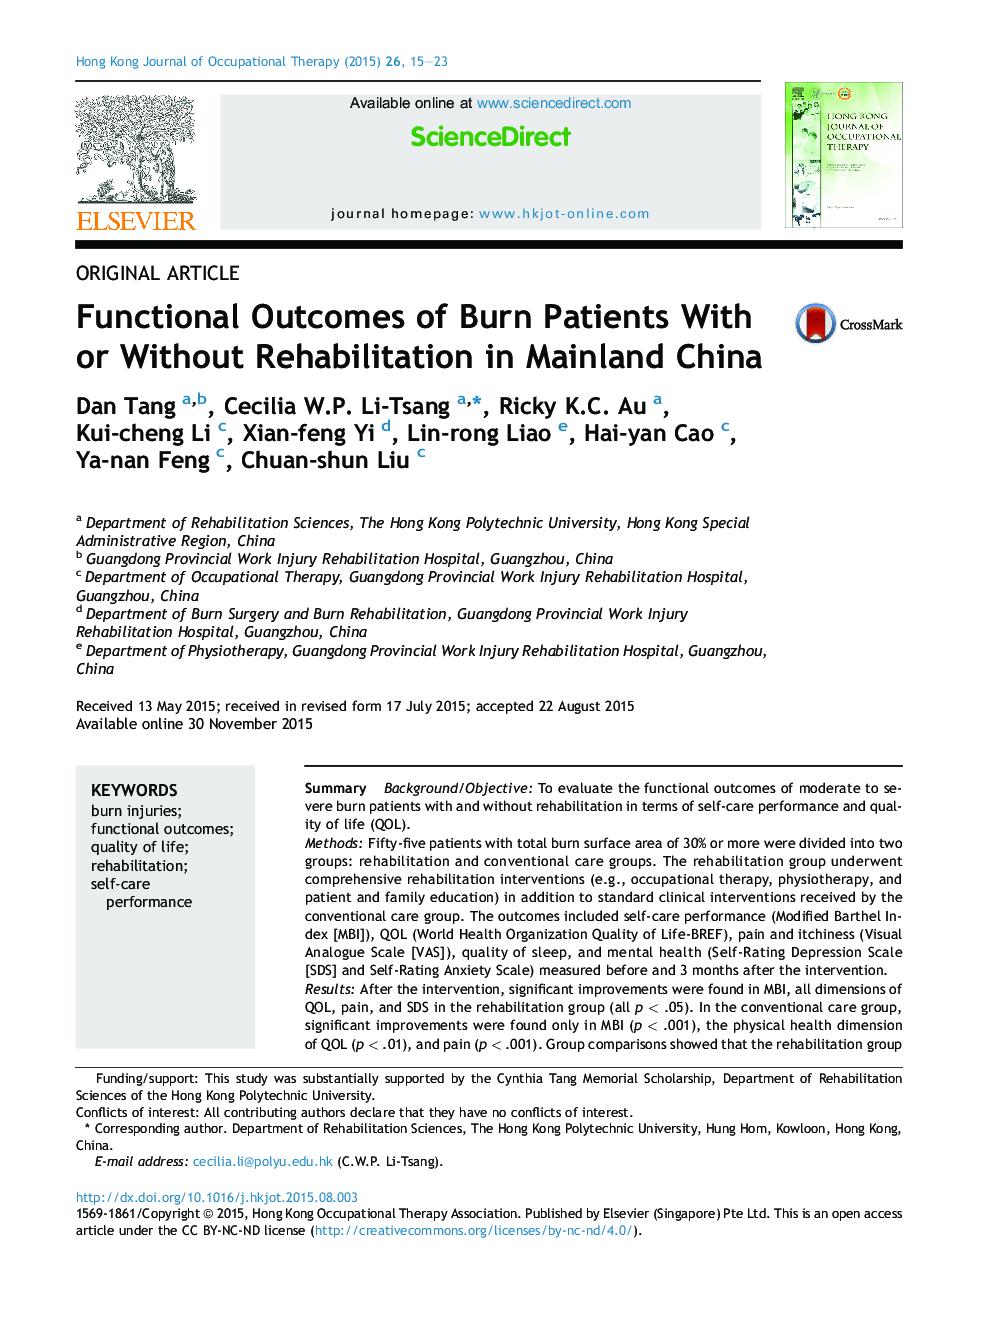 Functional Outcomes of Burn Patients With or Without Rehabilitation in Mainland China 